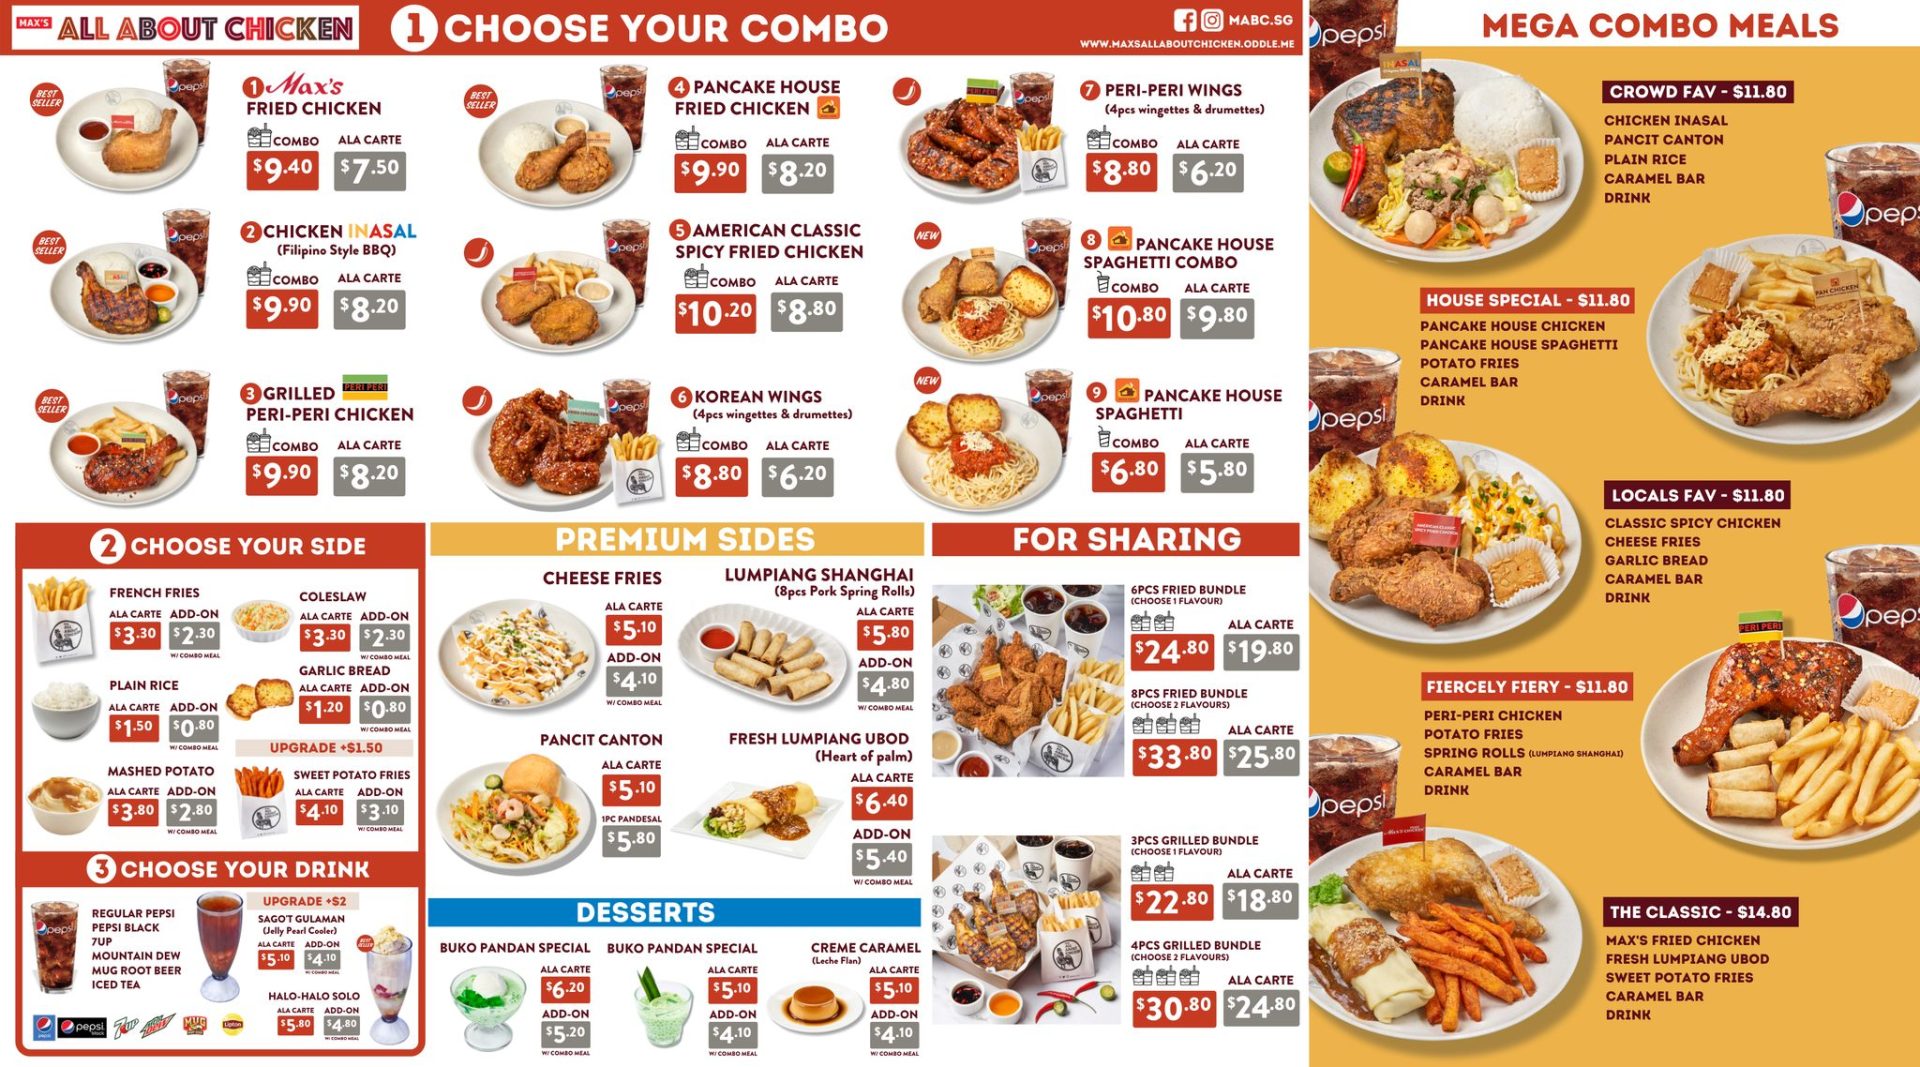 Max’s All About Chicken Singapore menu